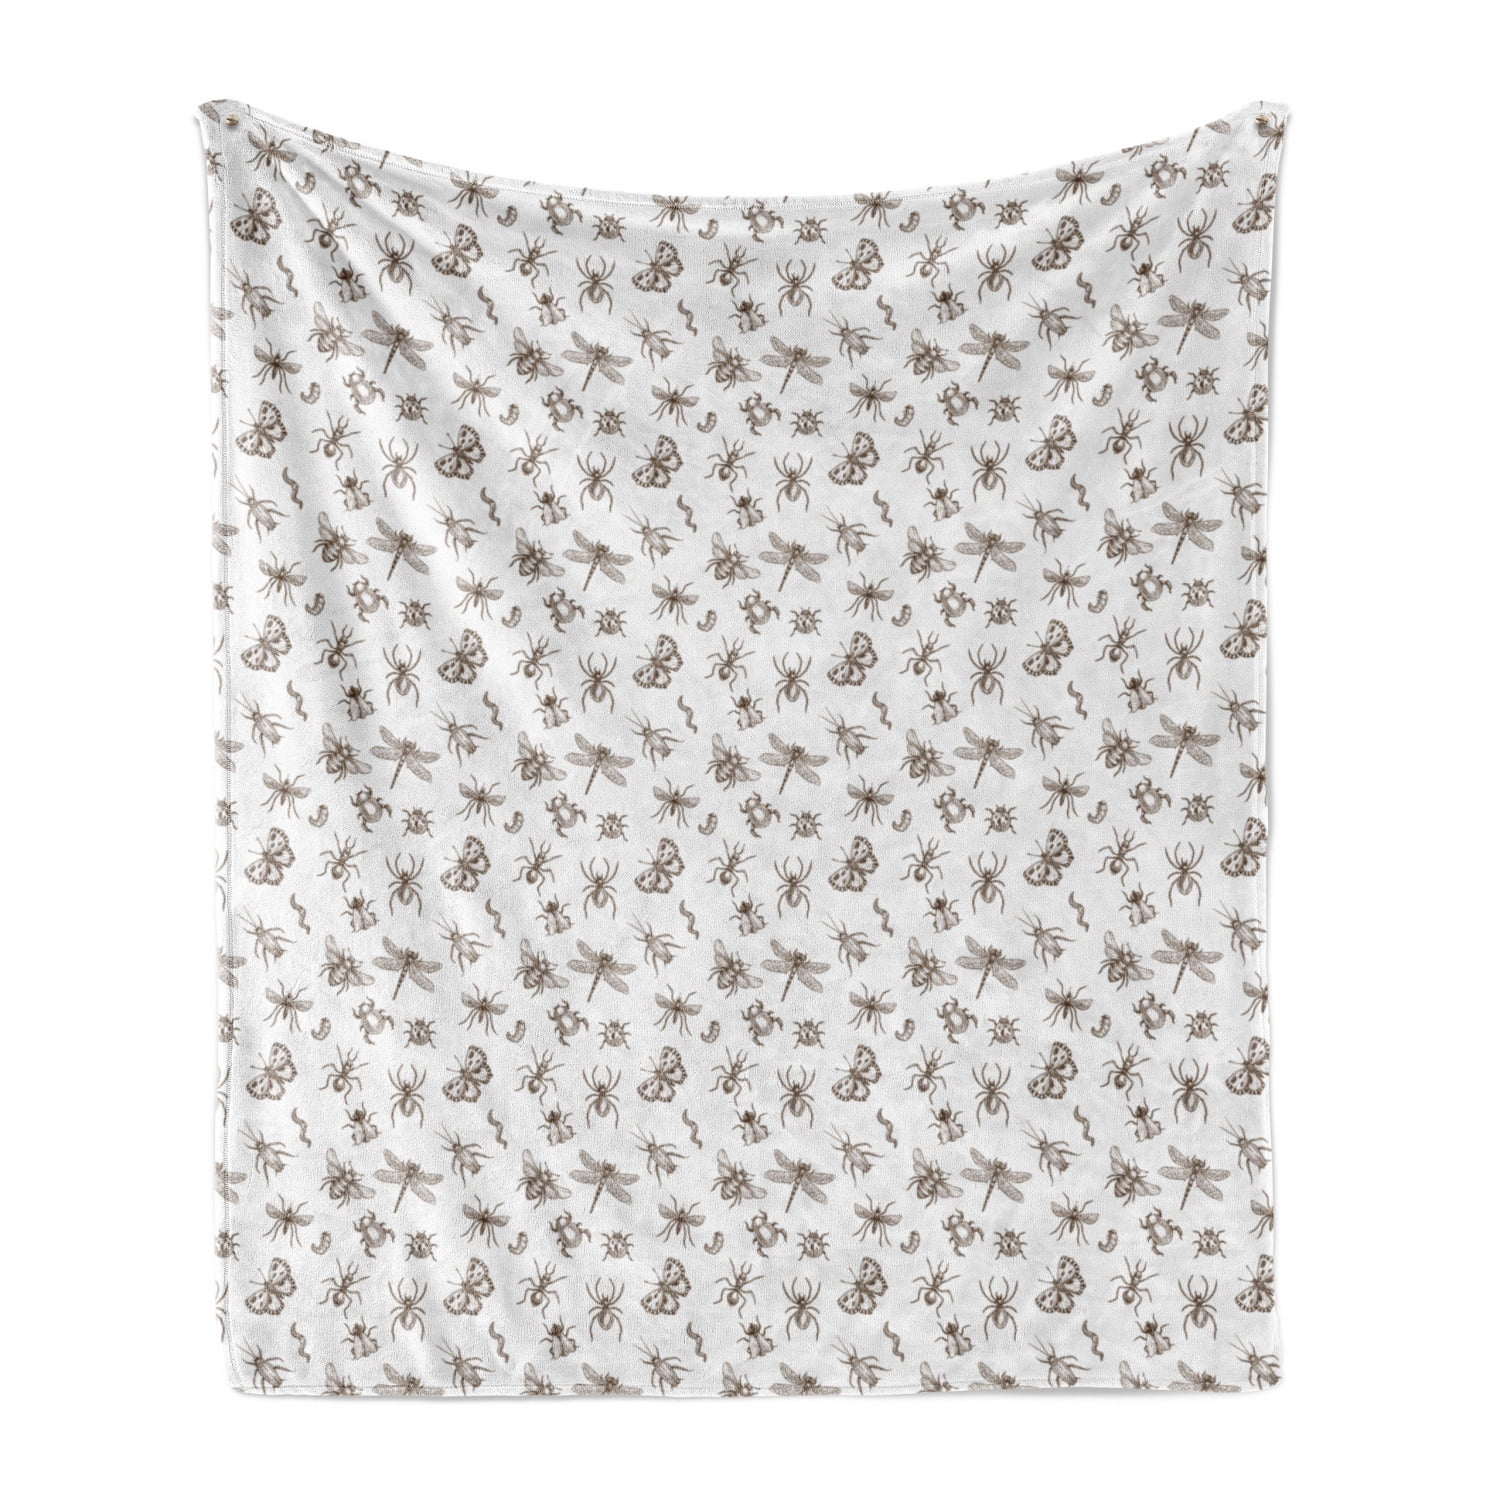 Repeating Pattern of Monochrome Various Entomological Creatures Umber and White 50 x 60 Cozy Plush for Indoor and Outdoor Use Ambesonne Insects Soft Flannel Fleece Throw Blanket